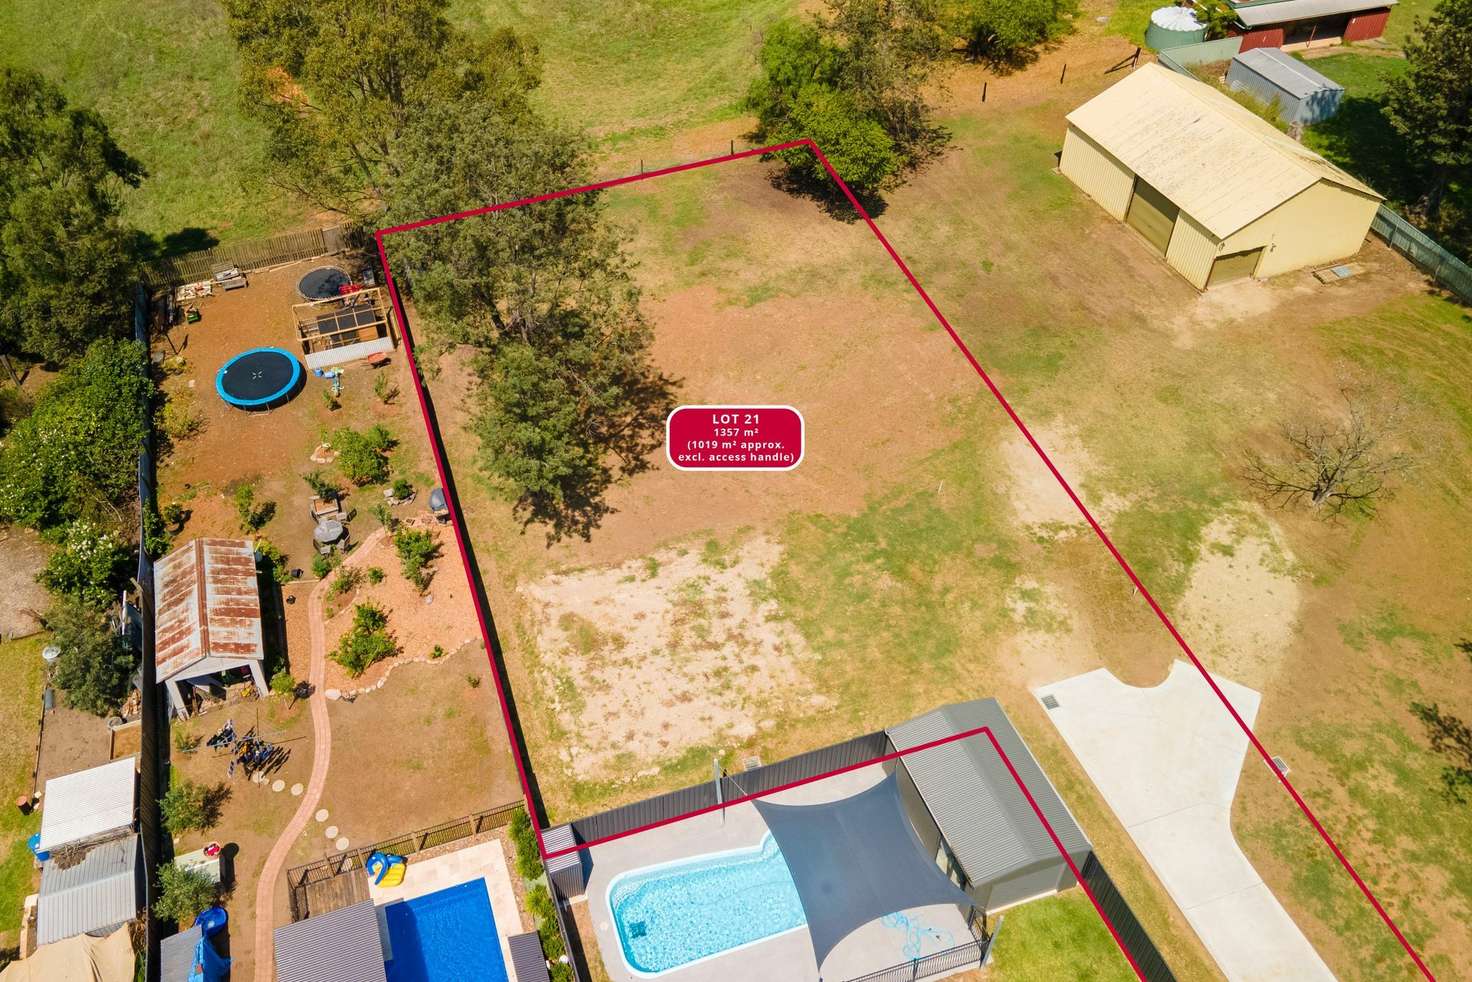 Main view of Homely residentialLand listing, LOT 21, 100 Maitland St, Branxton NSW 2335